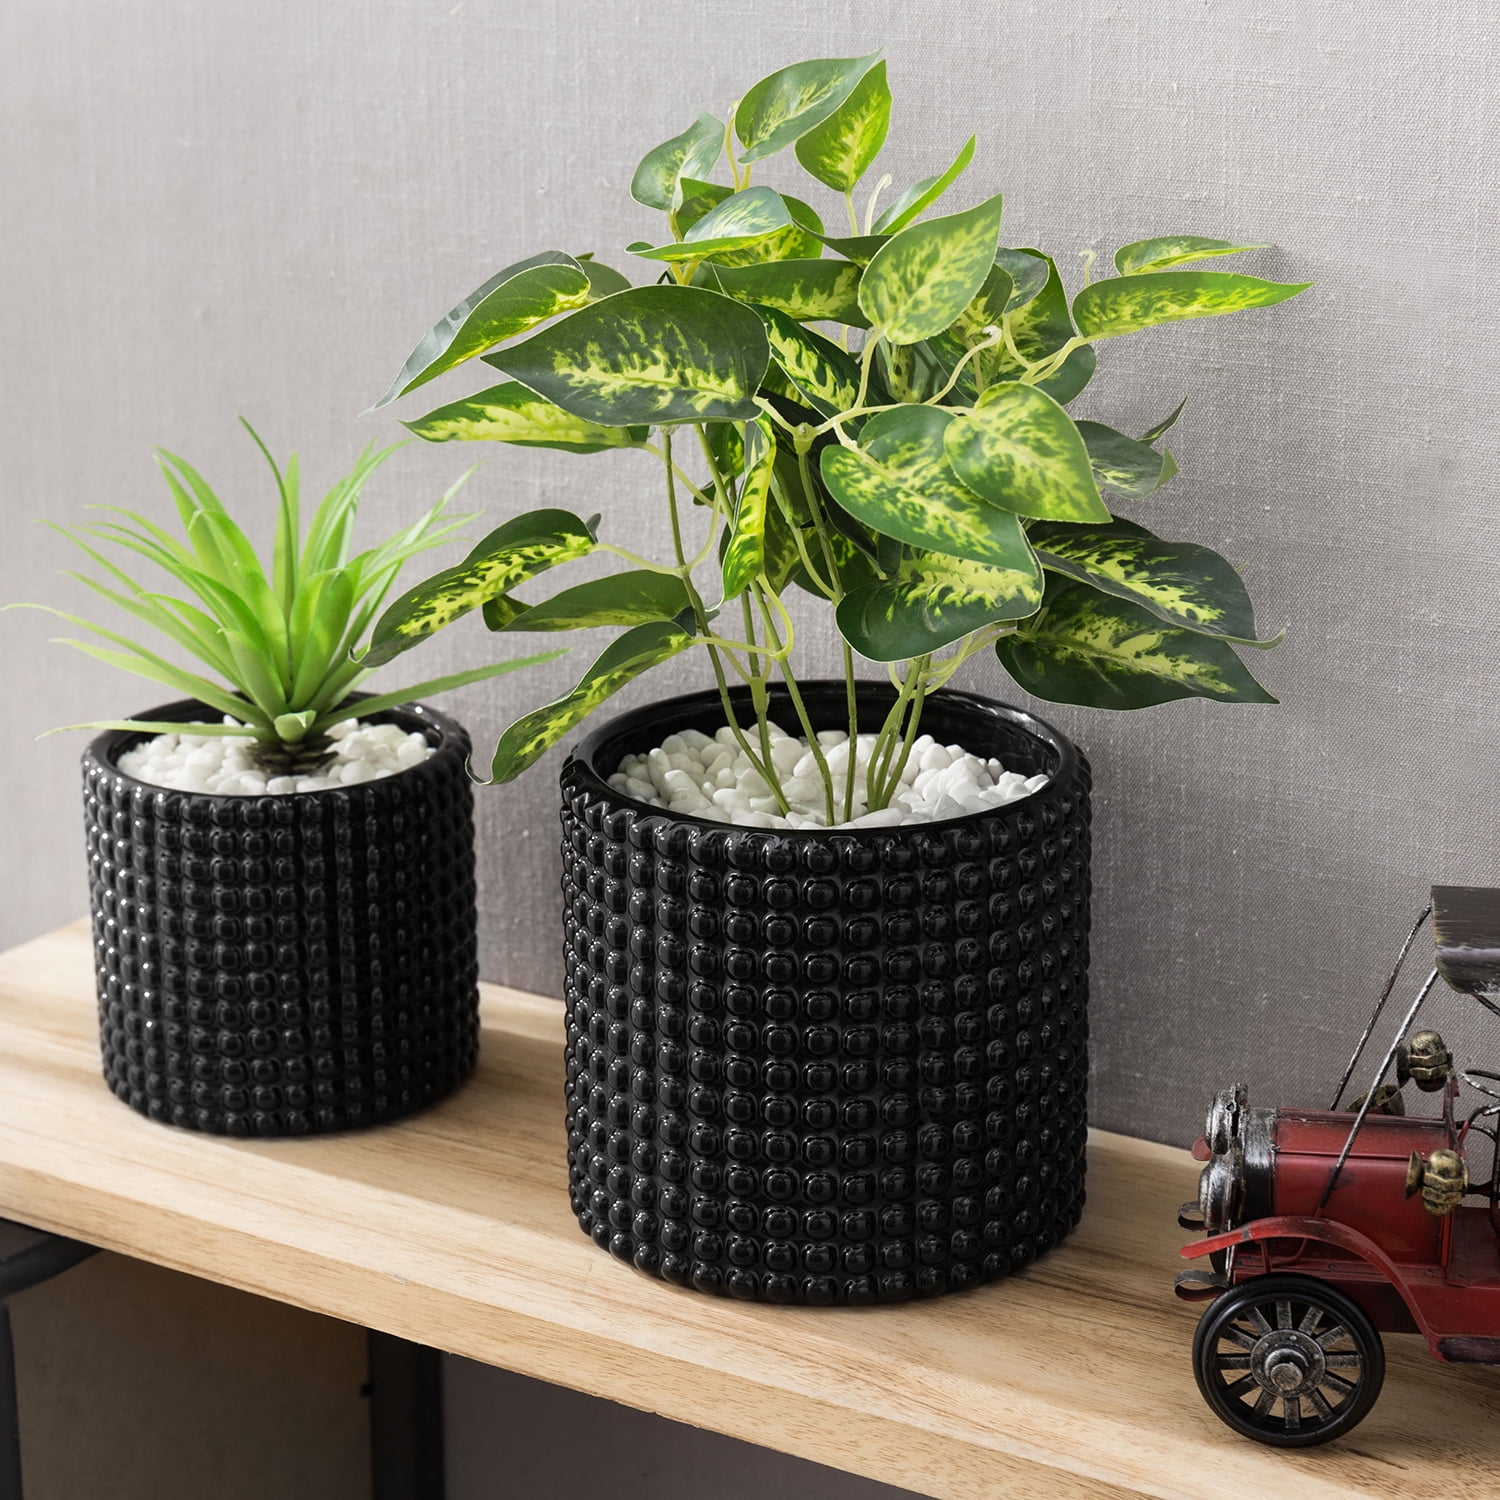 8 Inch Ceramic Vintage-Style Hobnail Textured Flower Pot with Drainage Hole for Modern Home Decor Black Planter Pots for Plants Indoor POTEY 056302, Plants NOT Included 